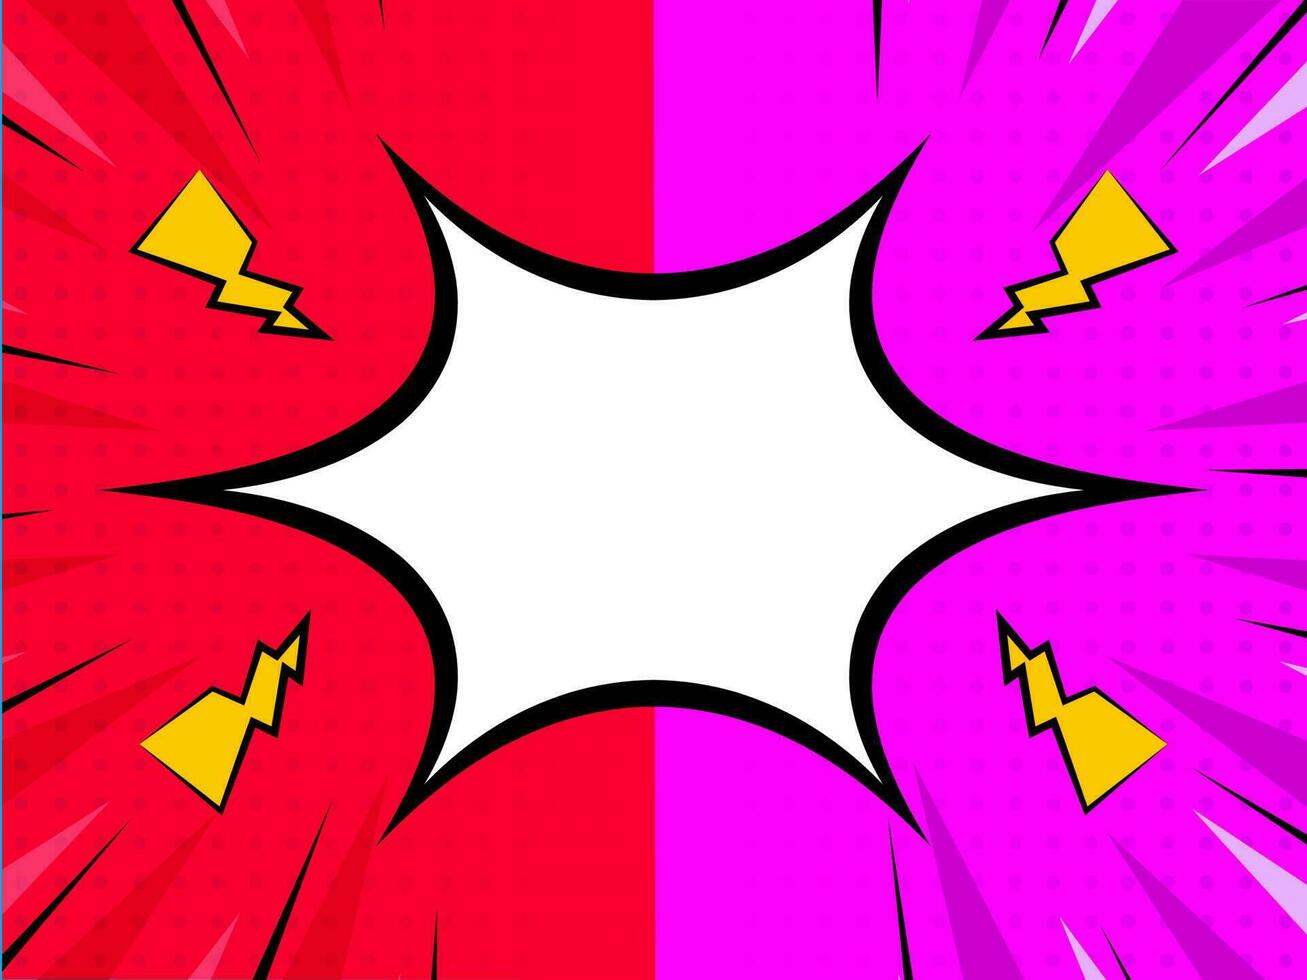 Empty Comic Frame With Lightning Bolts On Red And Magenta Dotted Background. vector